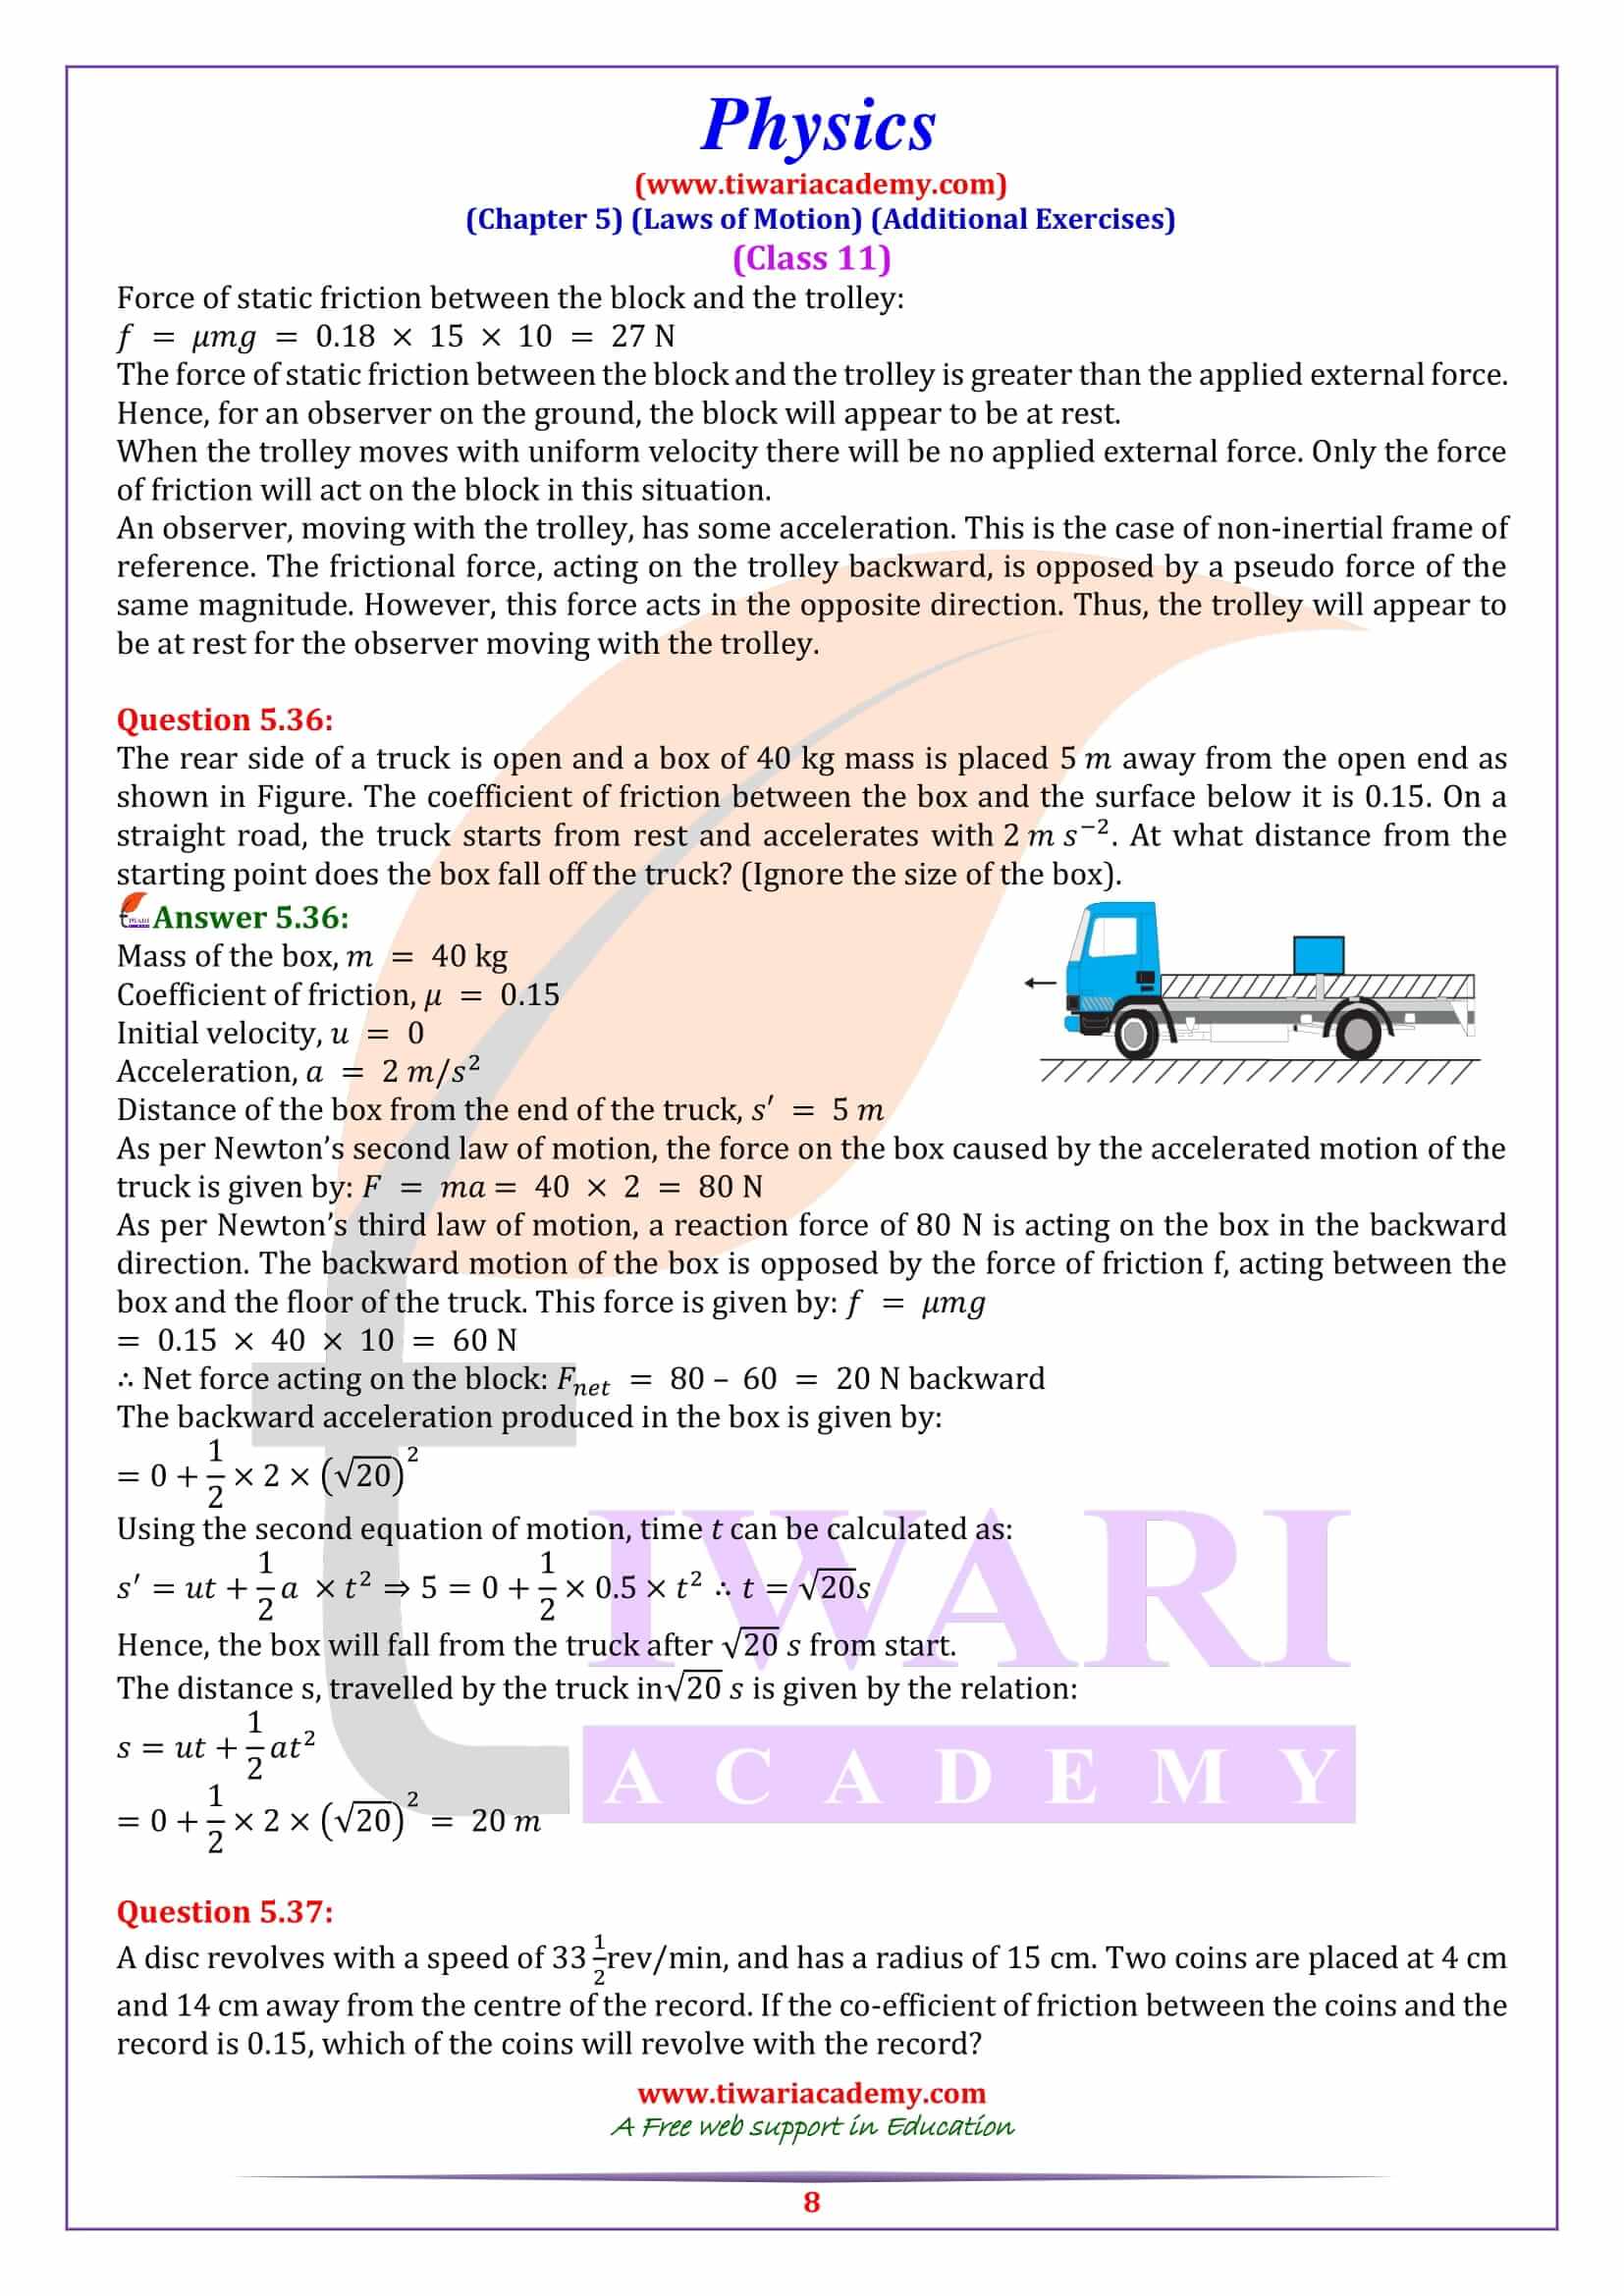 NCERT Solutions for Class 11 Physics Chapter 5 Additional Exercises